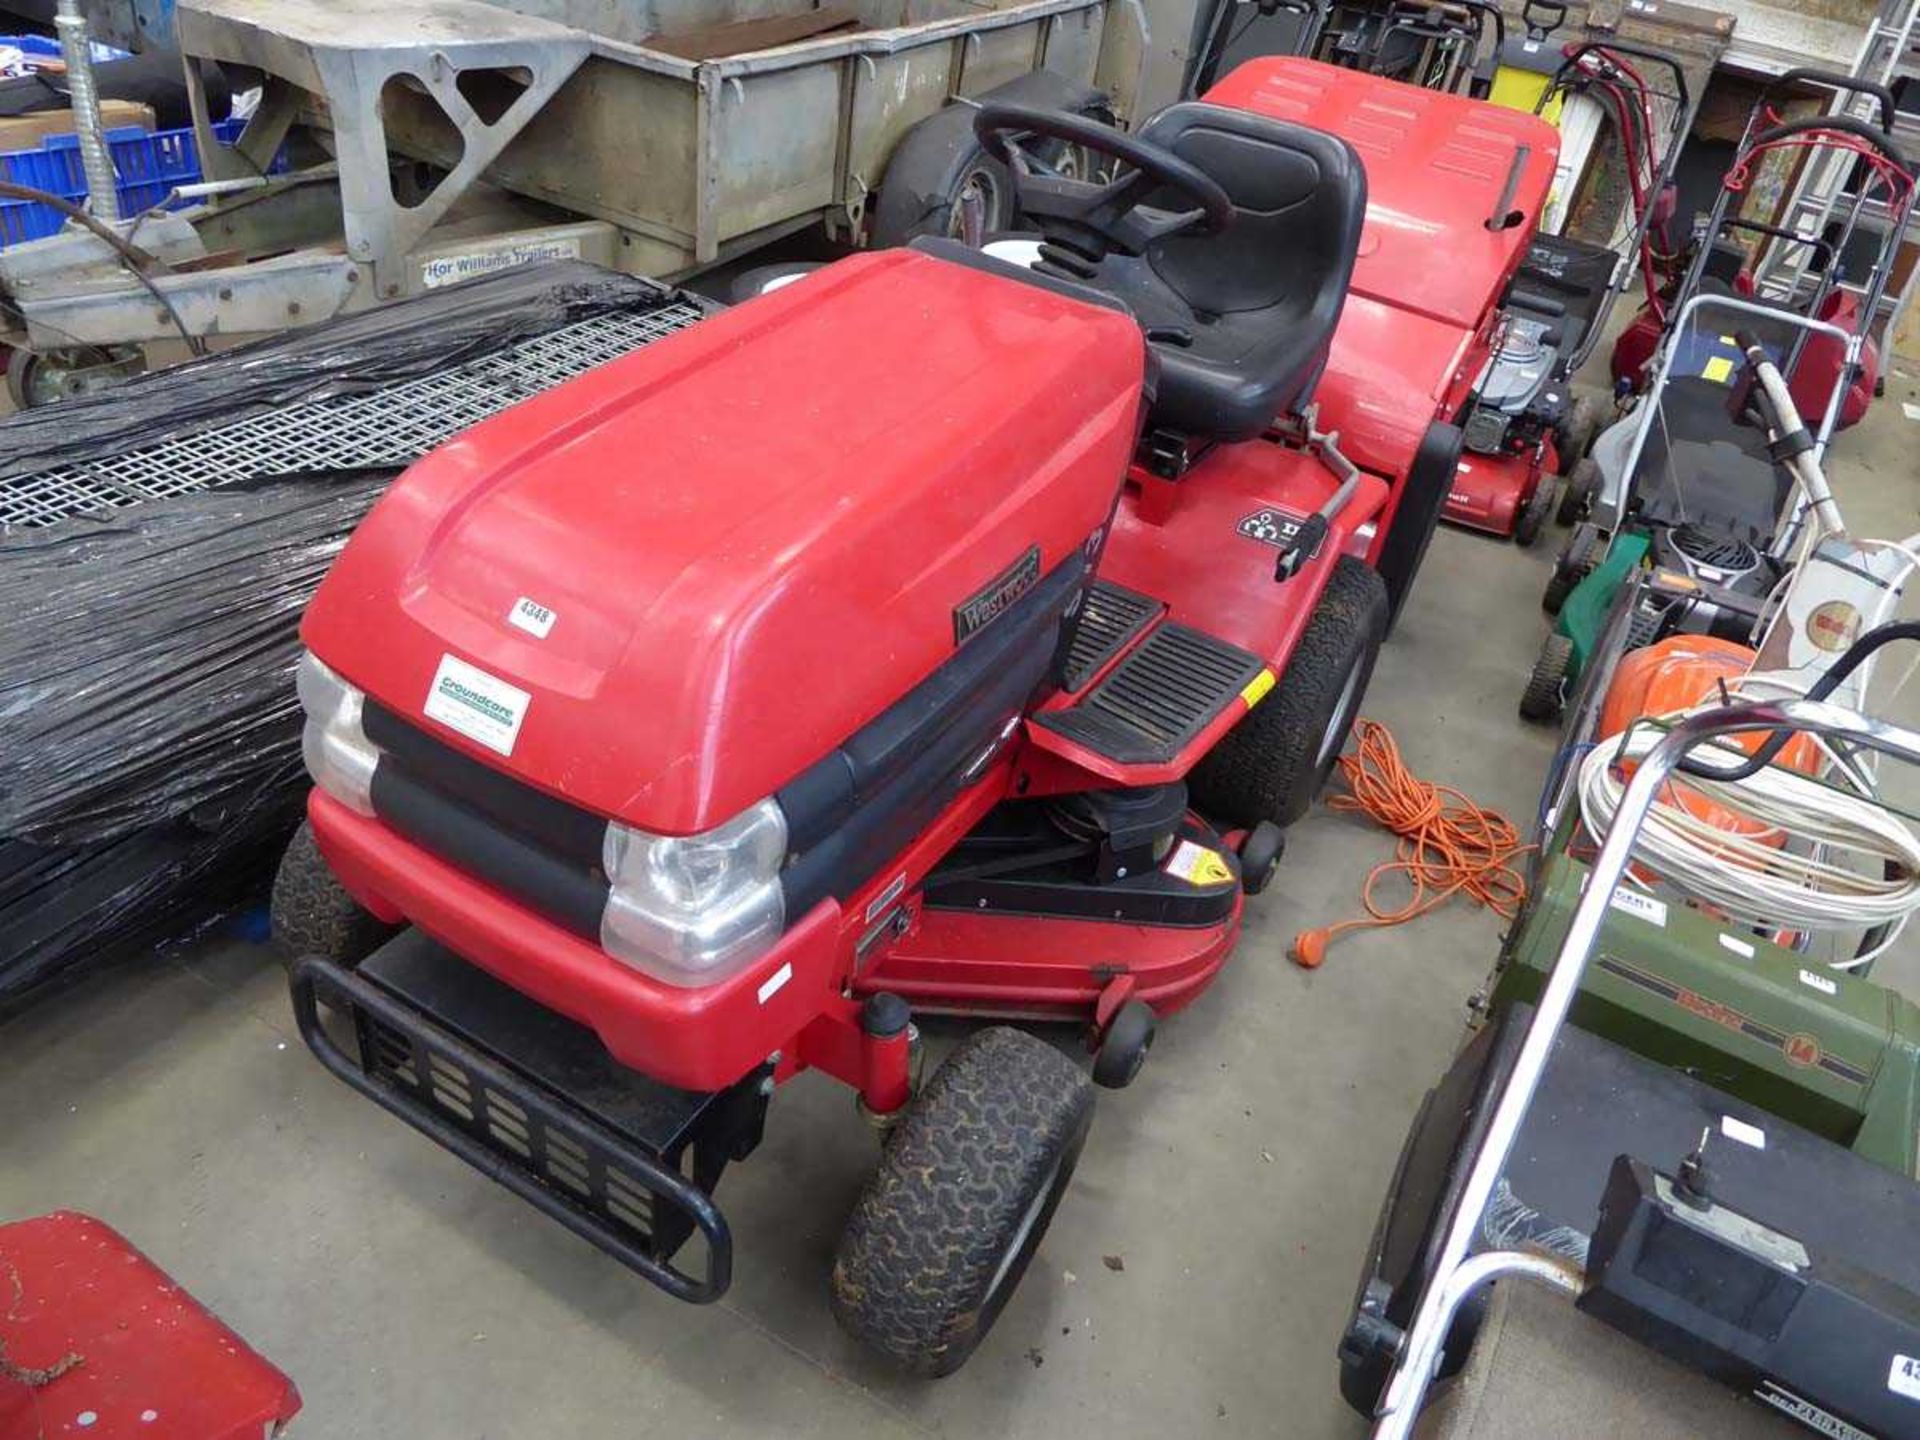 Westwood S1300 ride on mower with grass collector